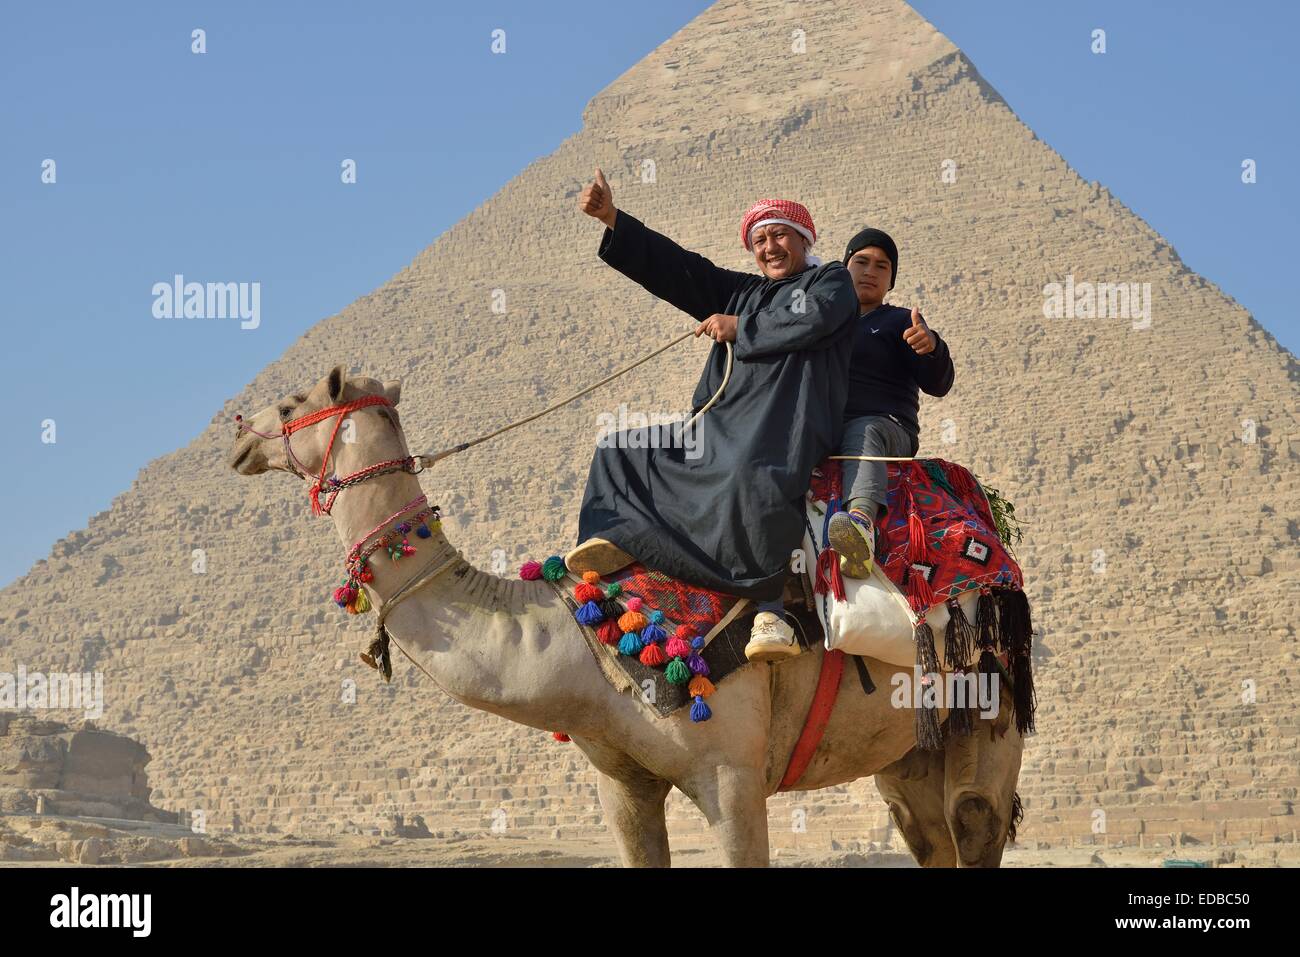 Camel owners on a camel in front of the Pyramid of Chephren, Giza, Egypt Stock Photo